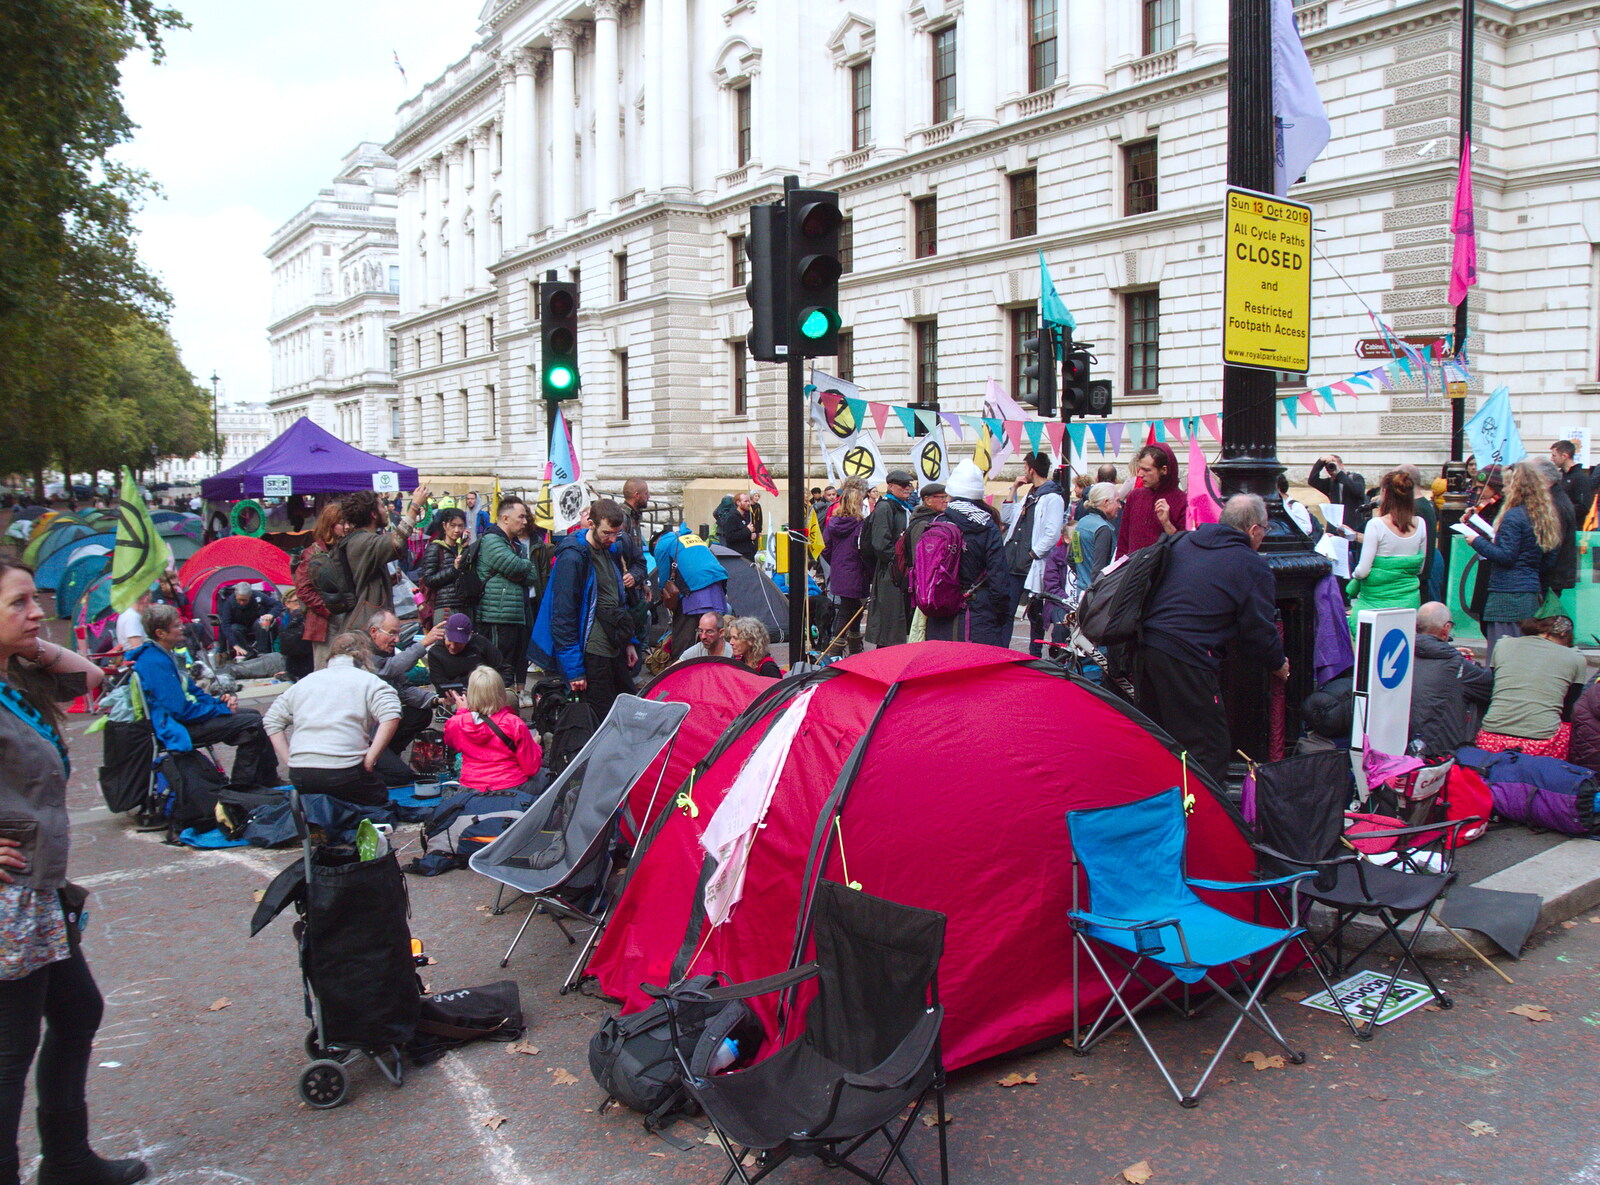 Tents on the streets near Westminster from The Extinction Rebellion Protest, Westminster, London - 9th October 2019